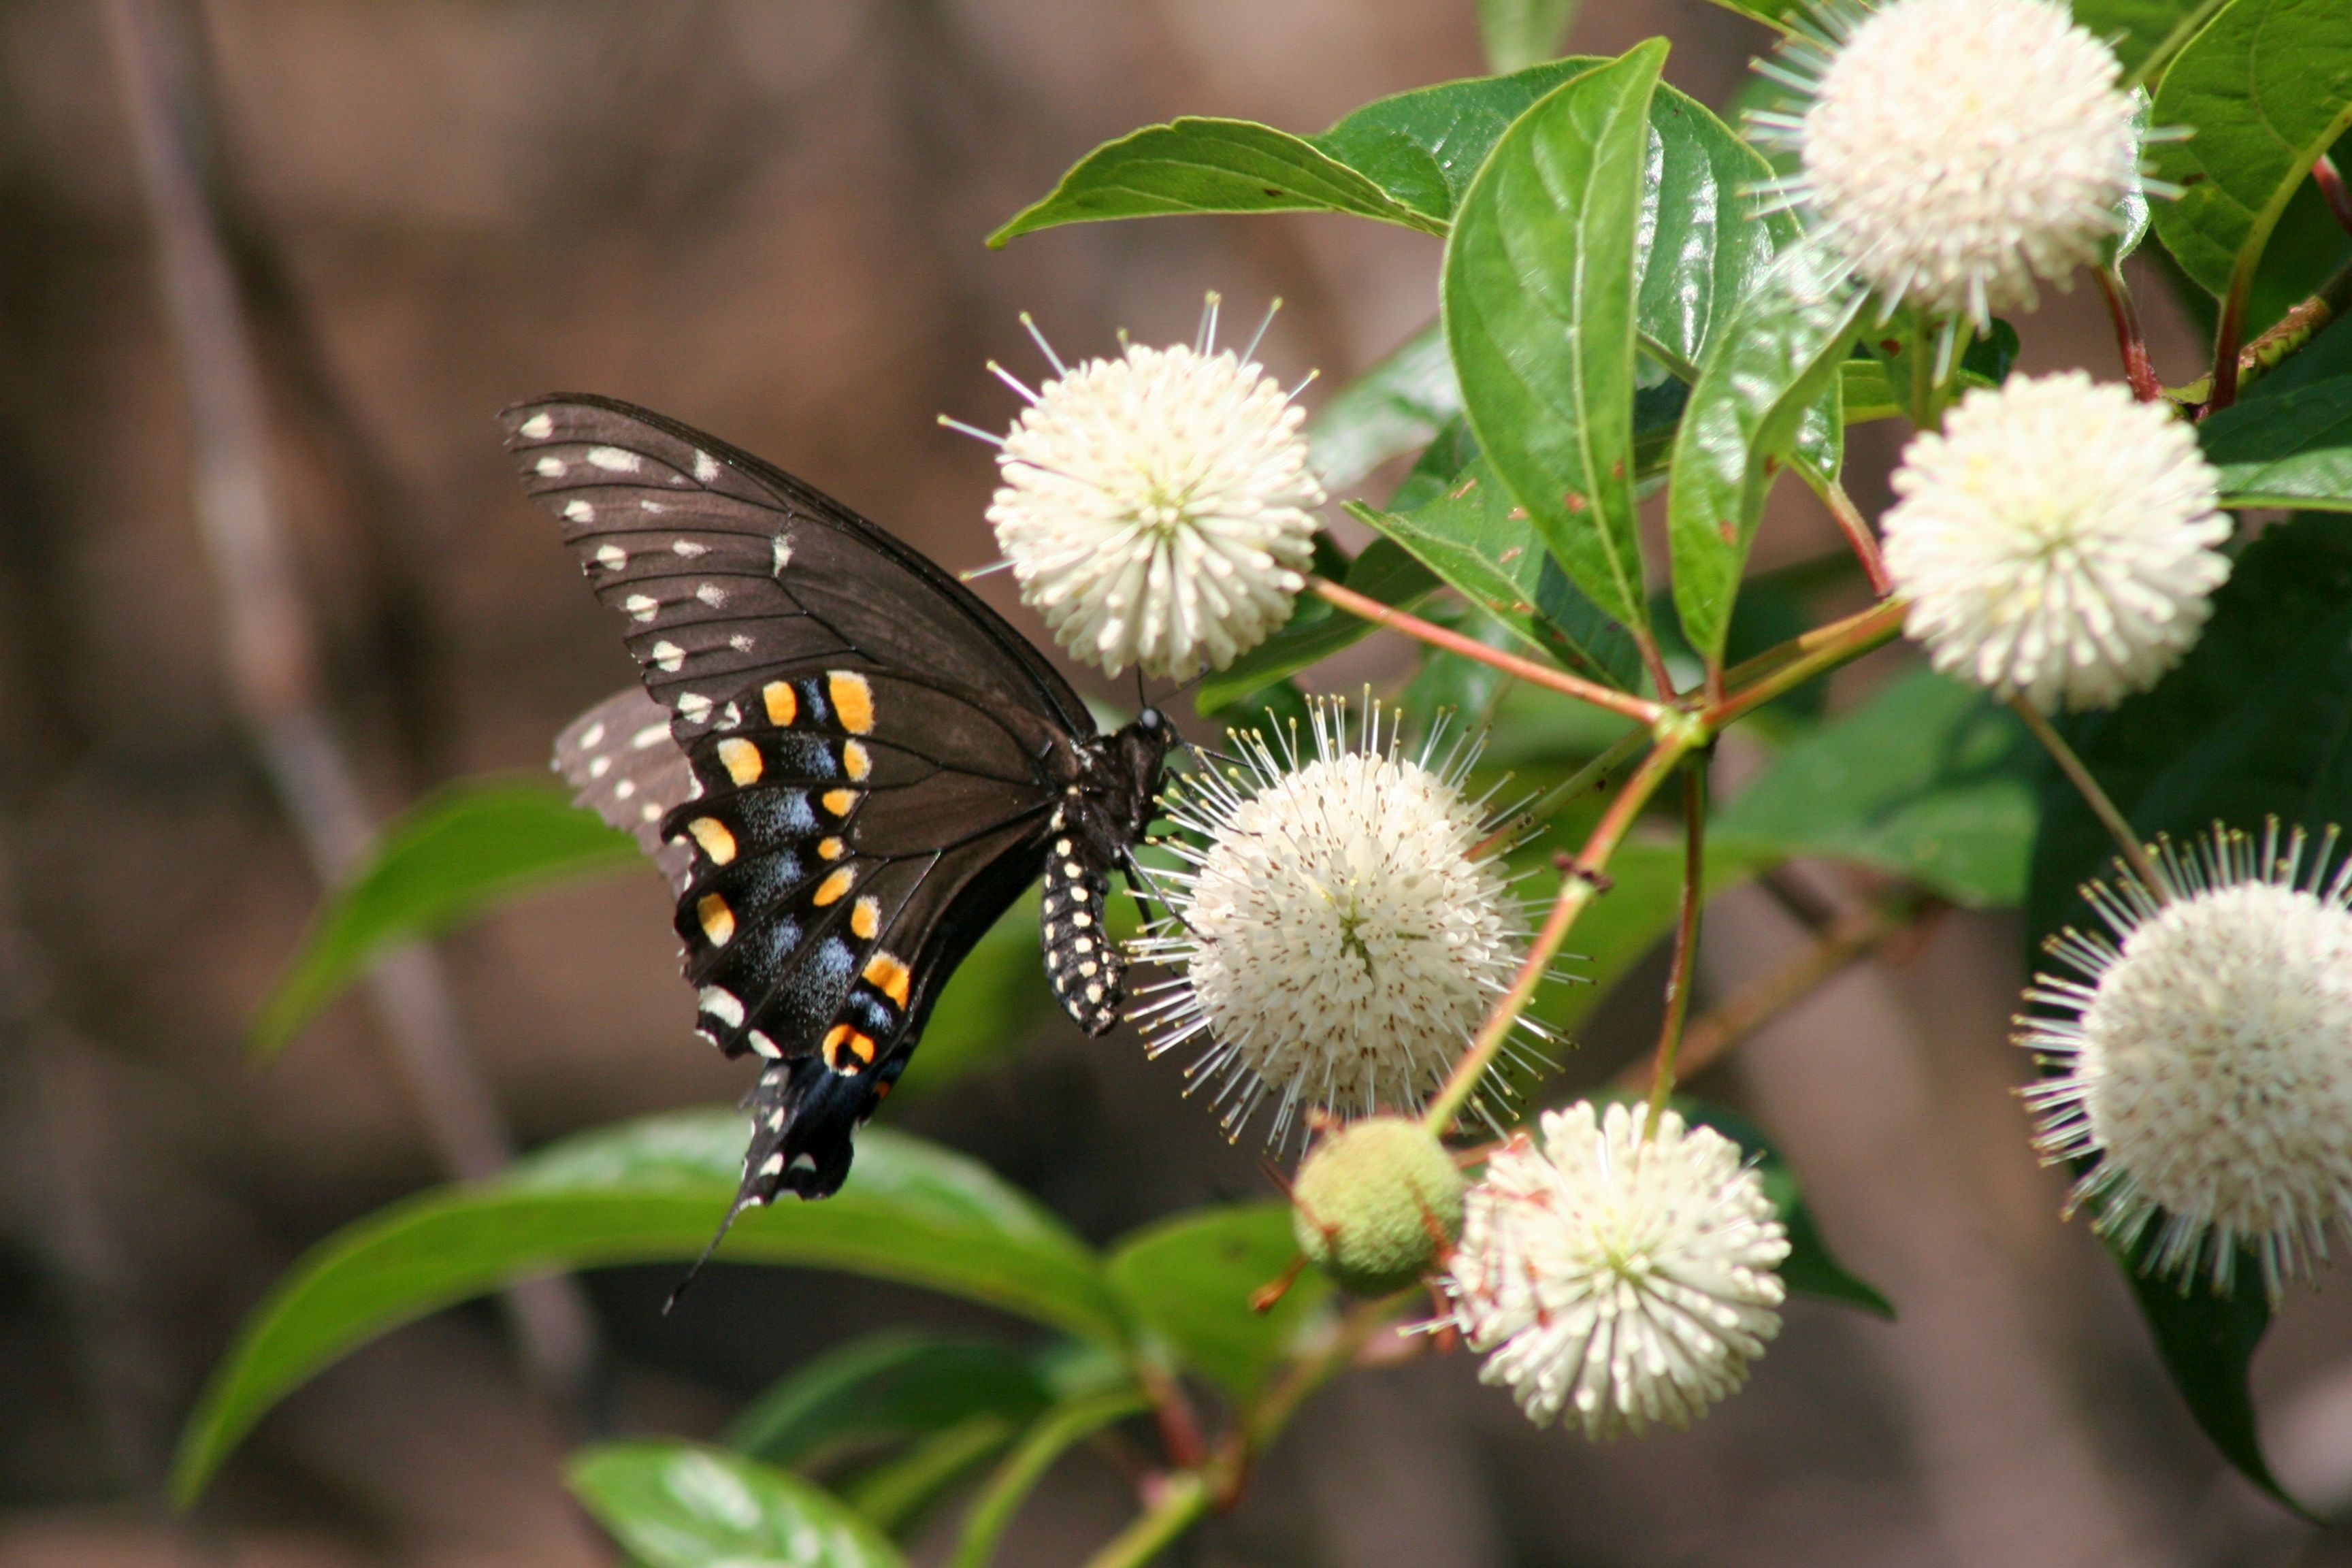 Brown butterfly with orange and blue spots on wings visits flowering plant with big round white blossoms